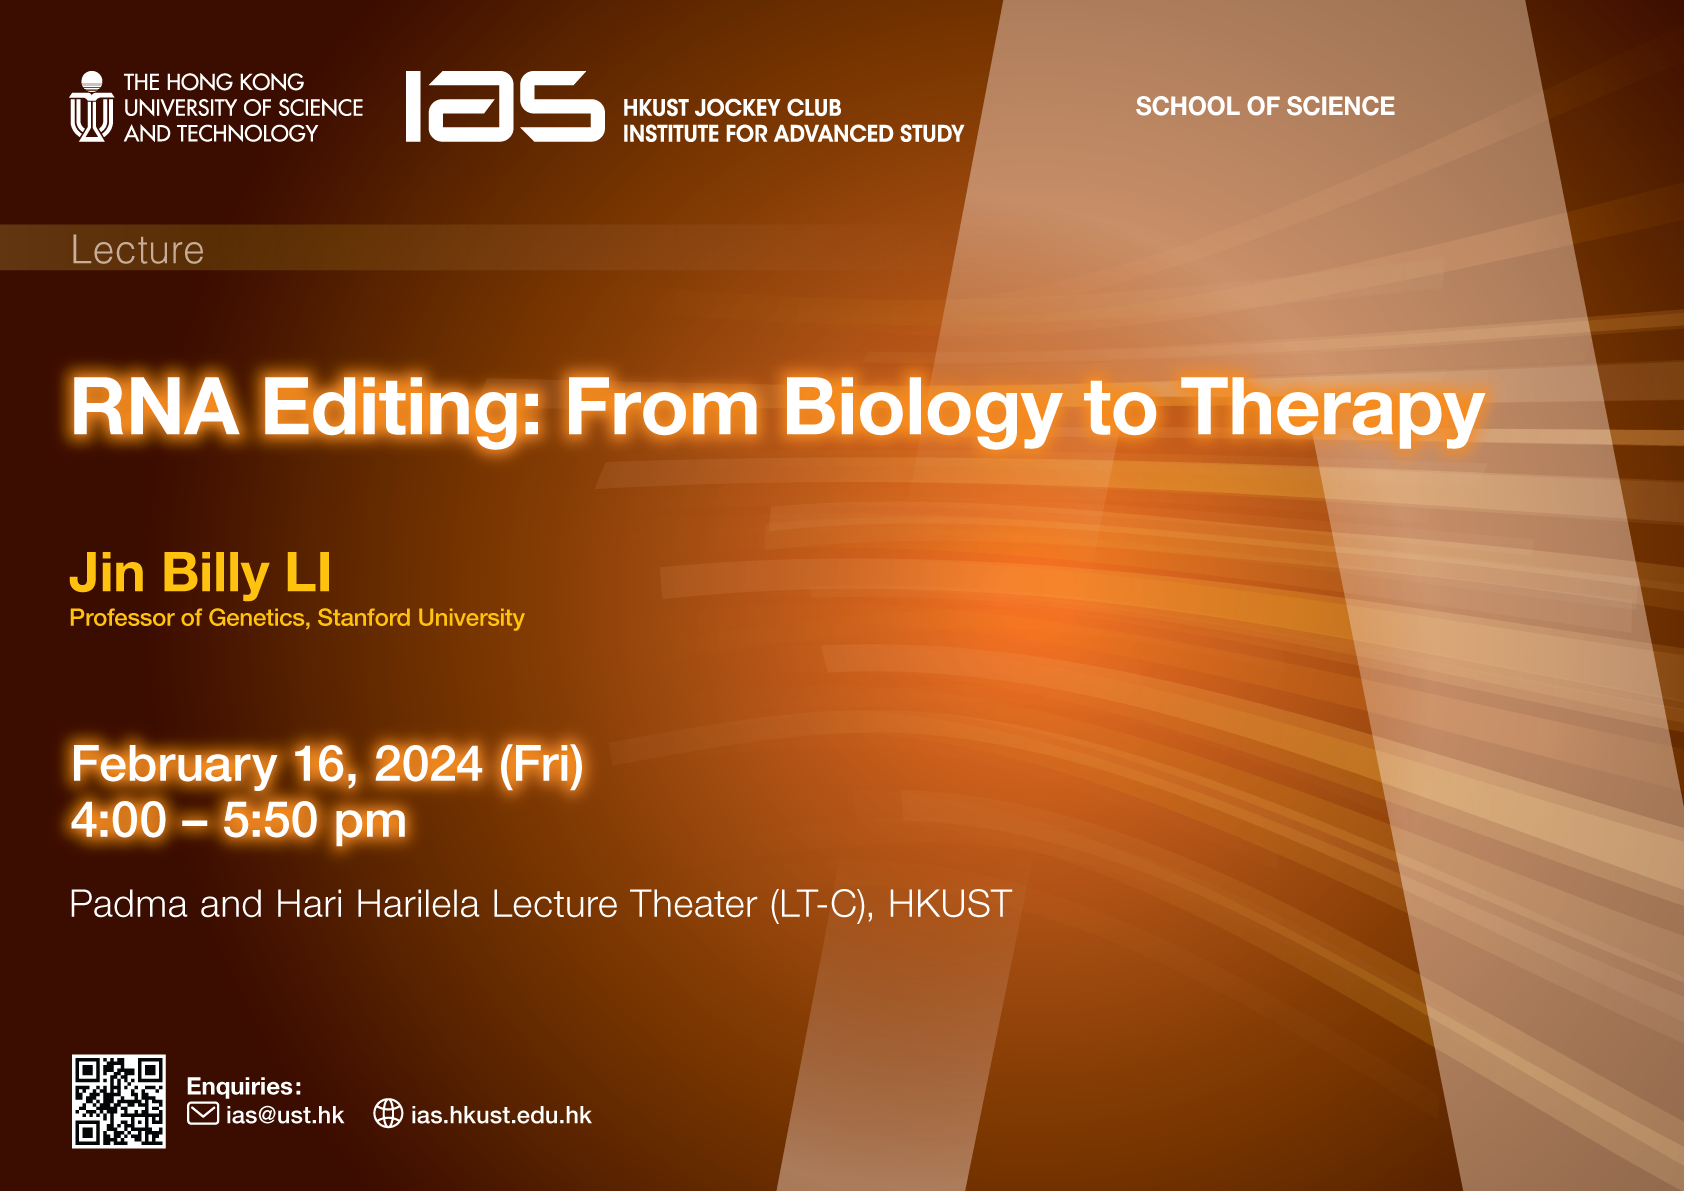 IAS / School of Science Joint Lecture - RNA Editing: From Biology to Therapy